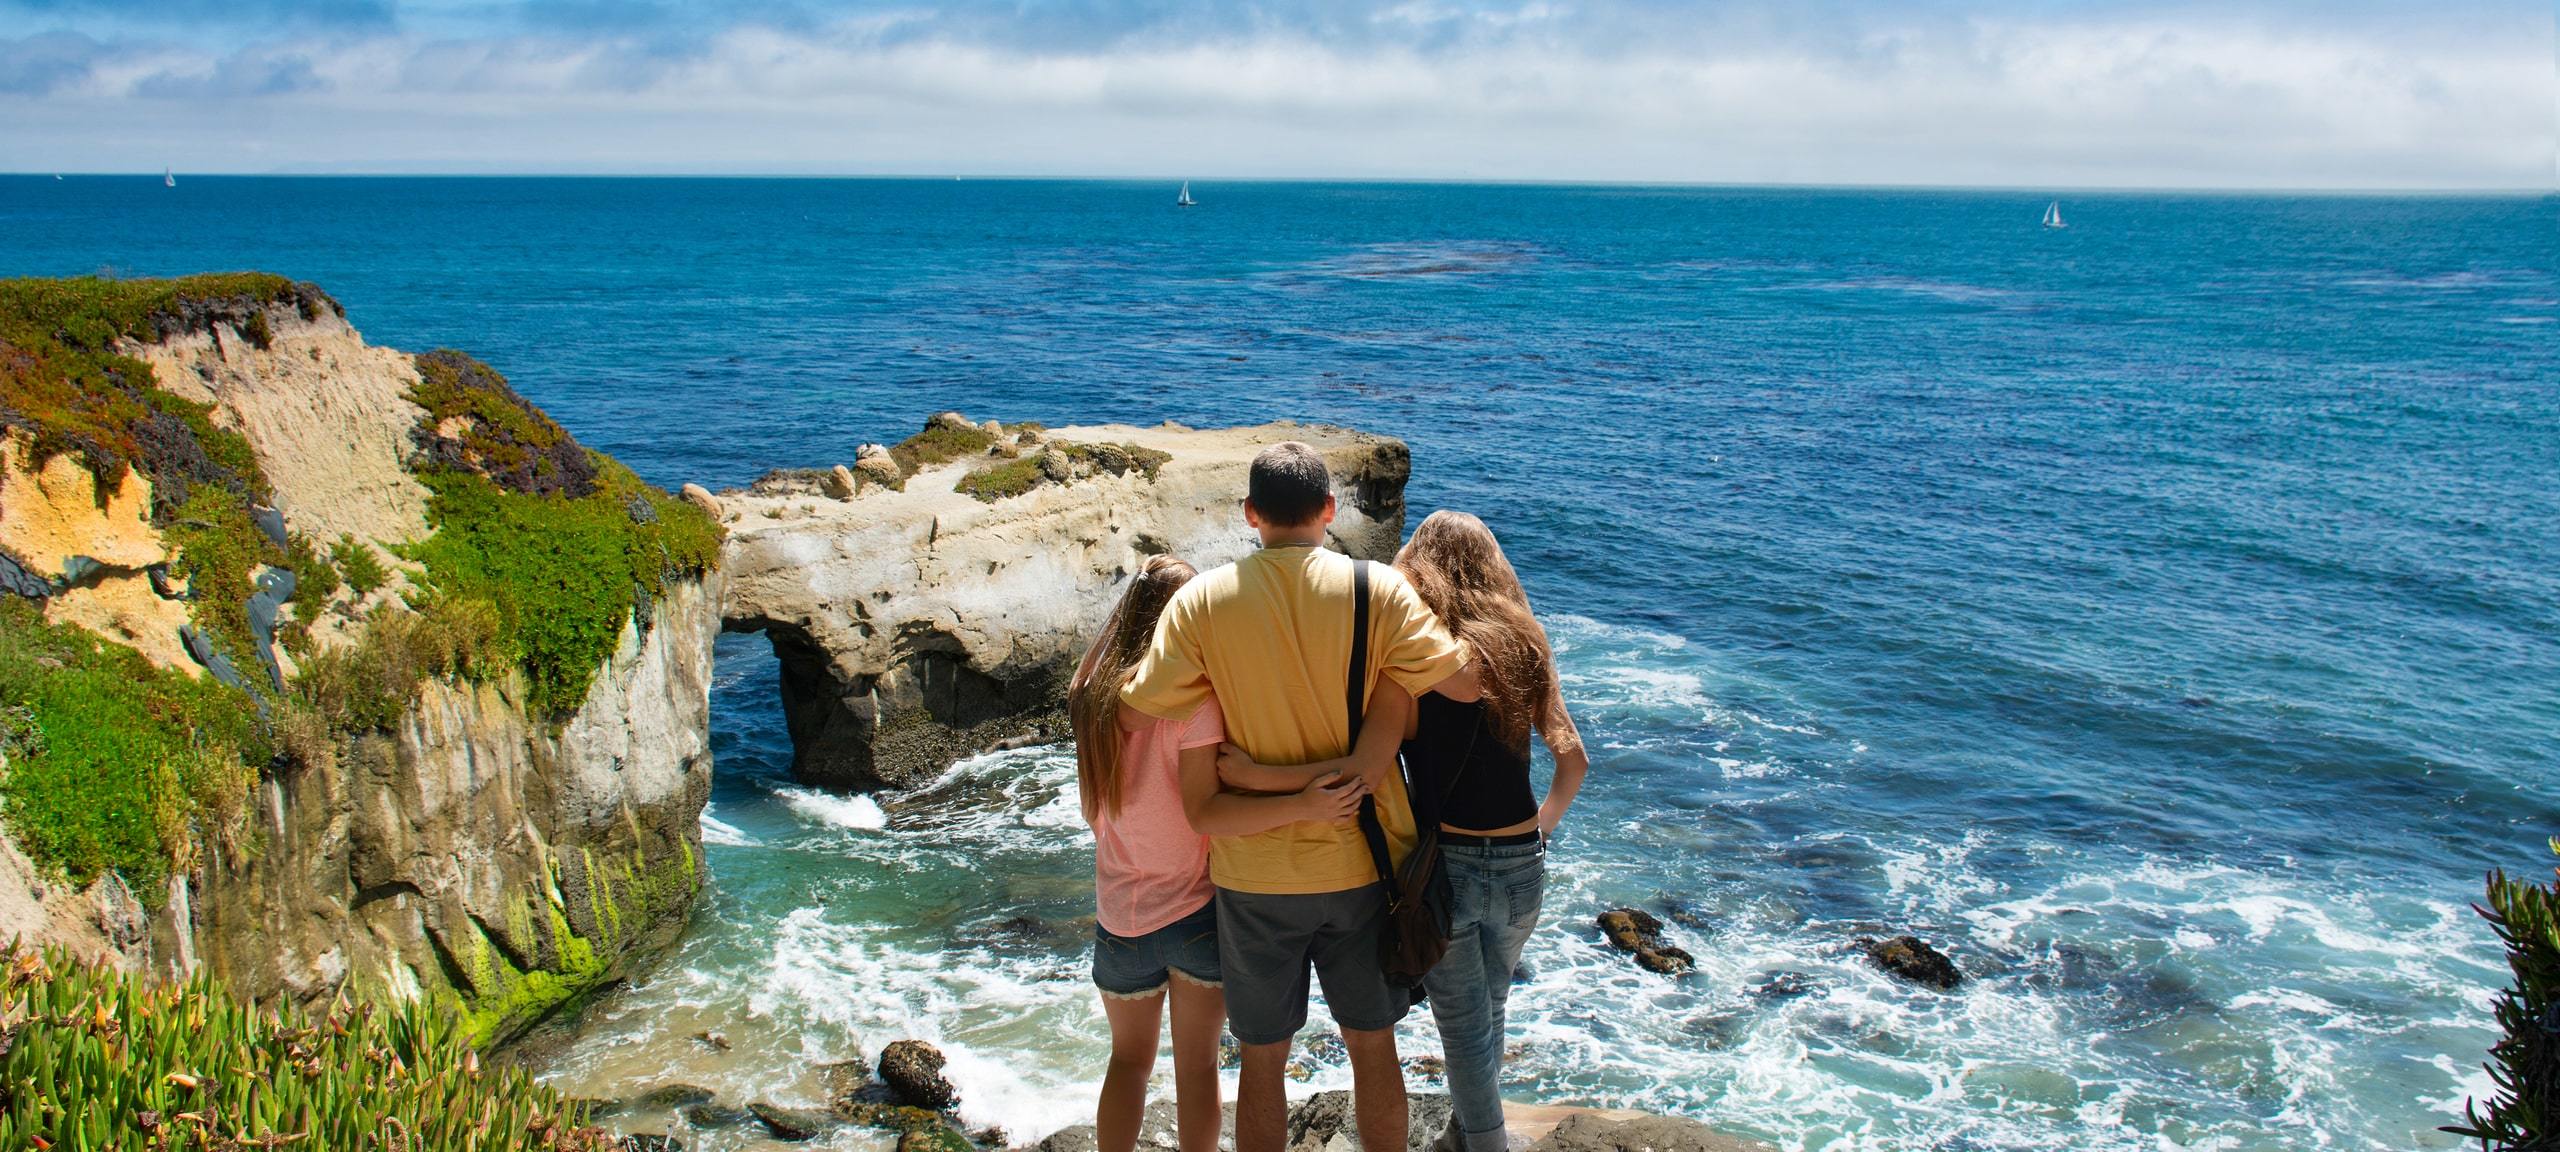 Family trio overlooking the Santa Cruz waves from the rocks above on a sunny day